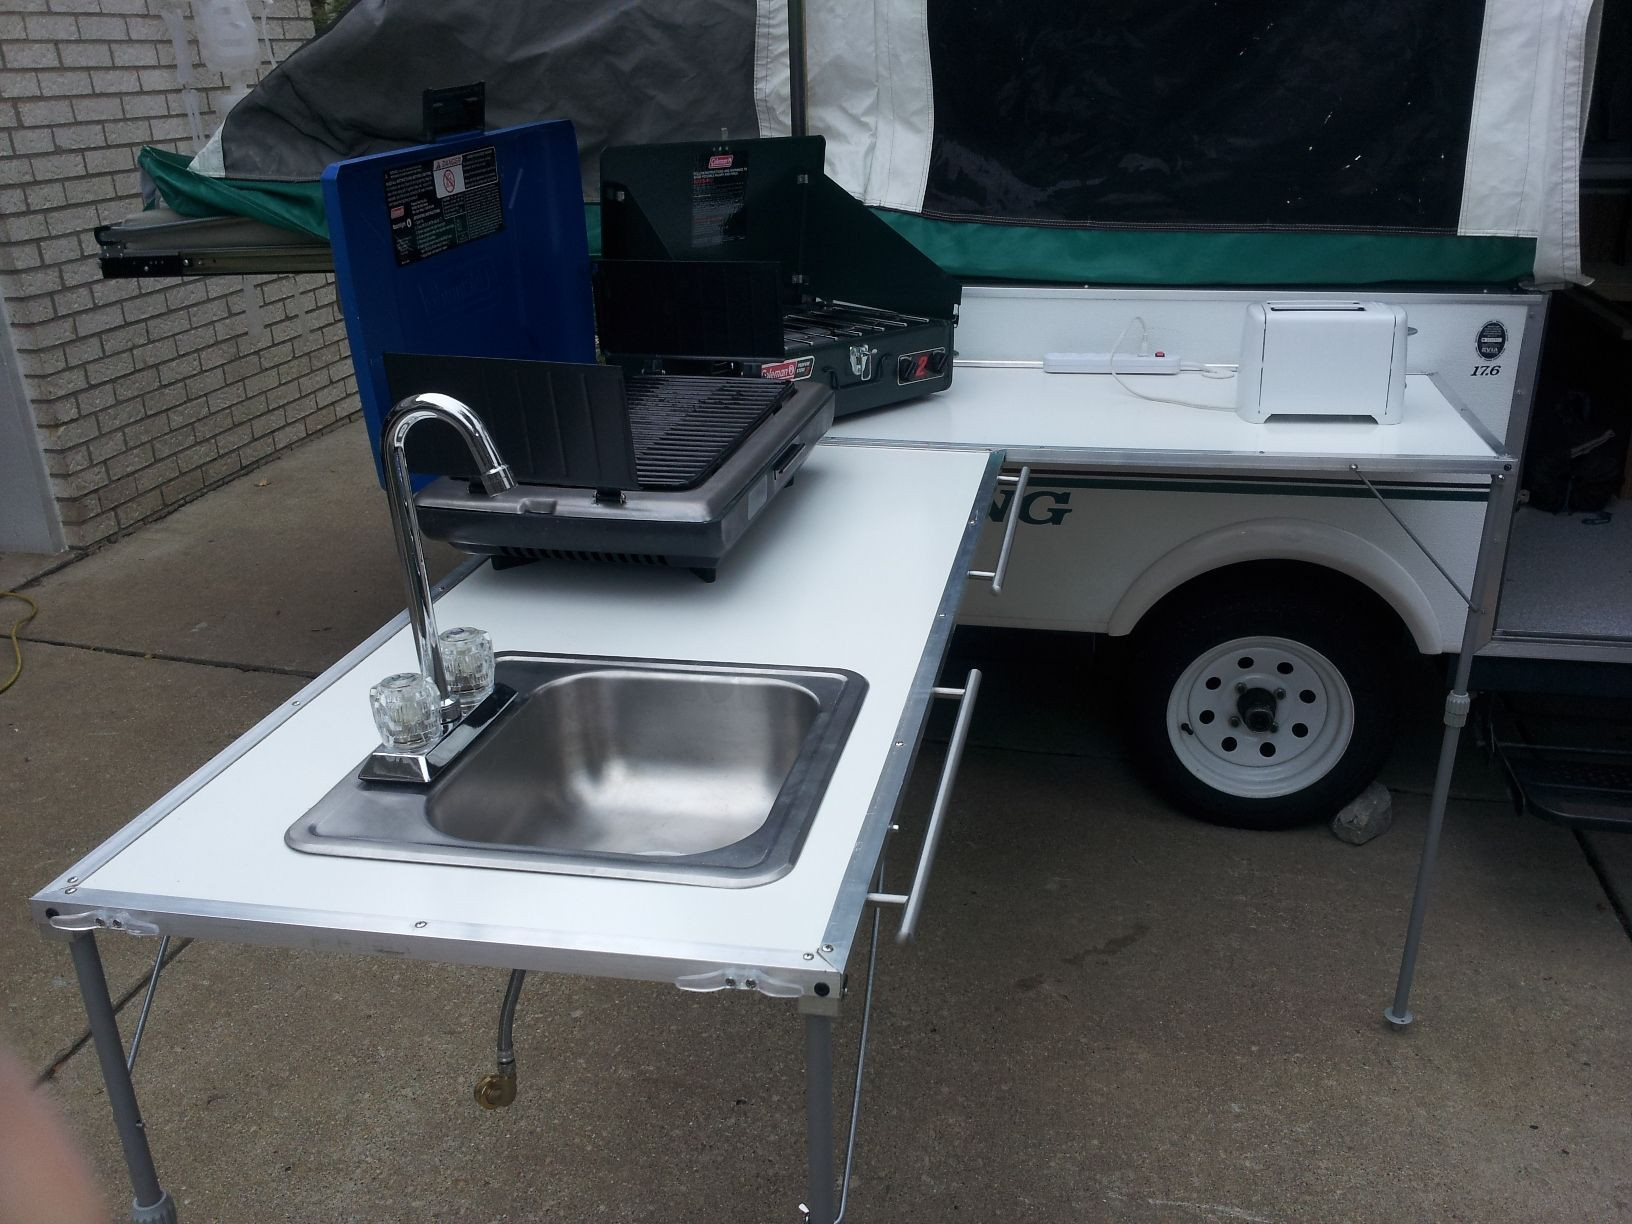 Adding Outdoor Kitchen To Rv
 replacement bathroom units for a pop up camper